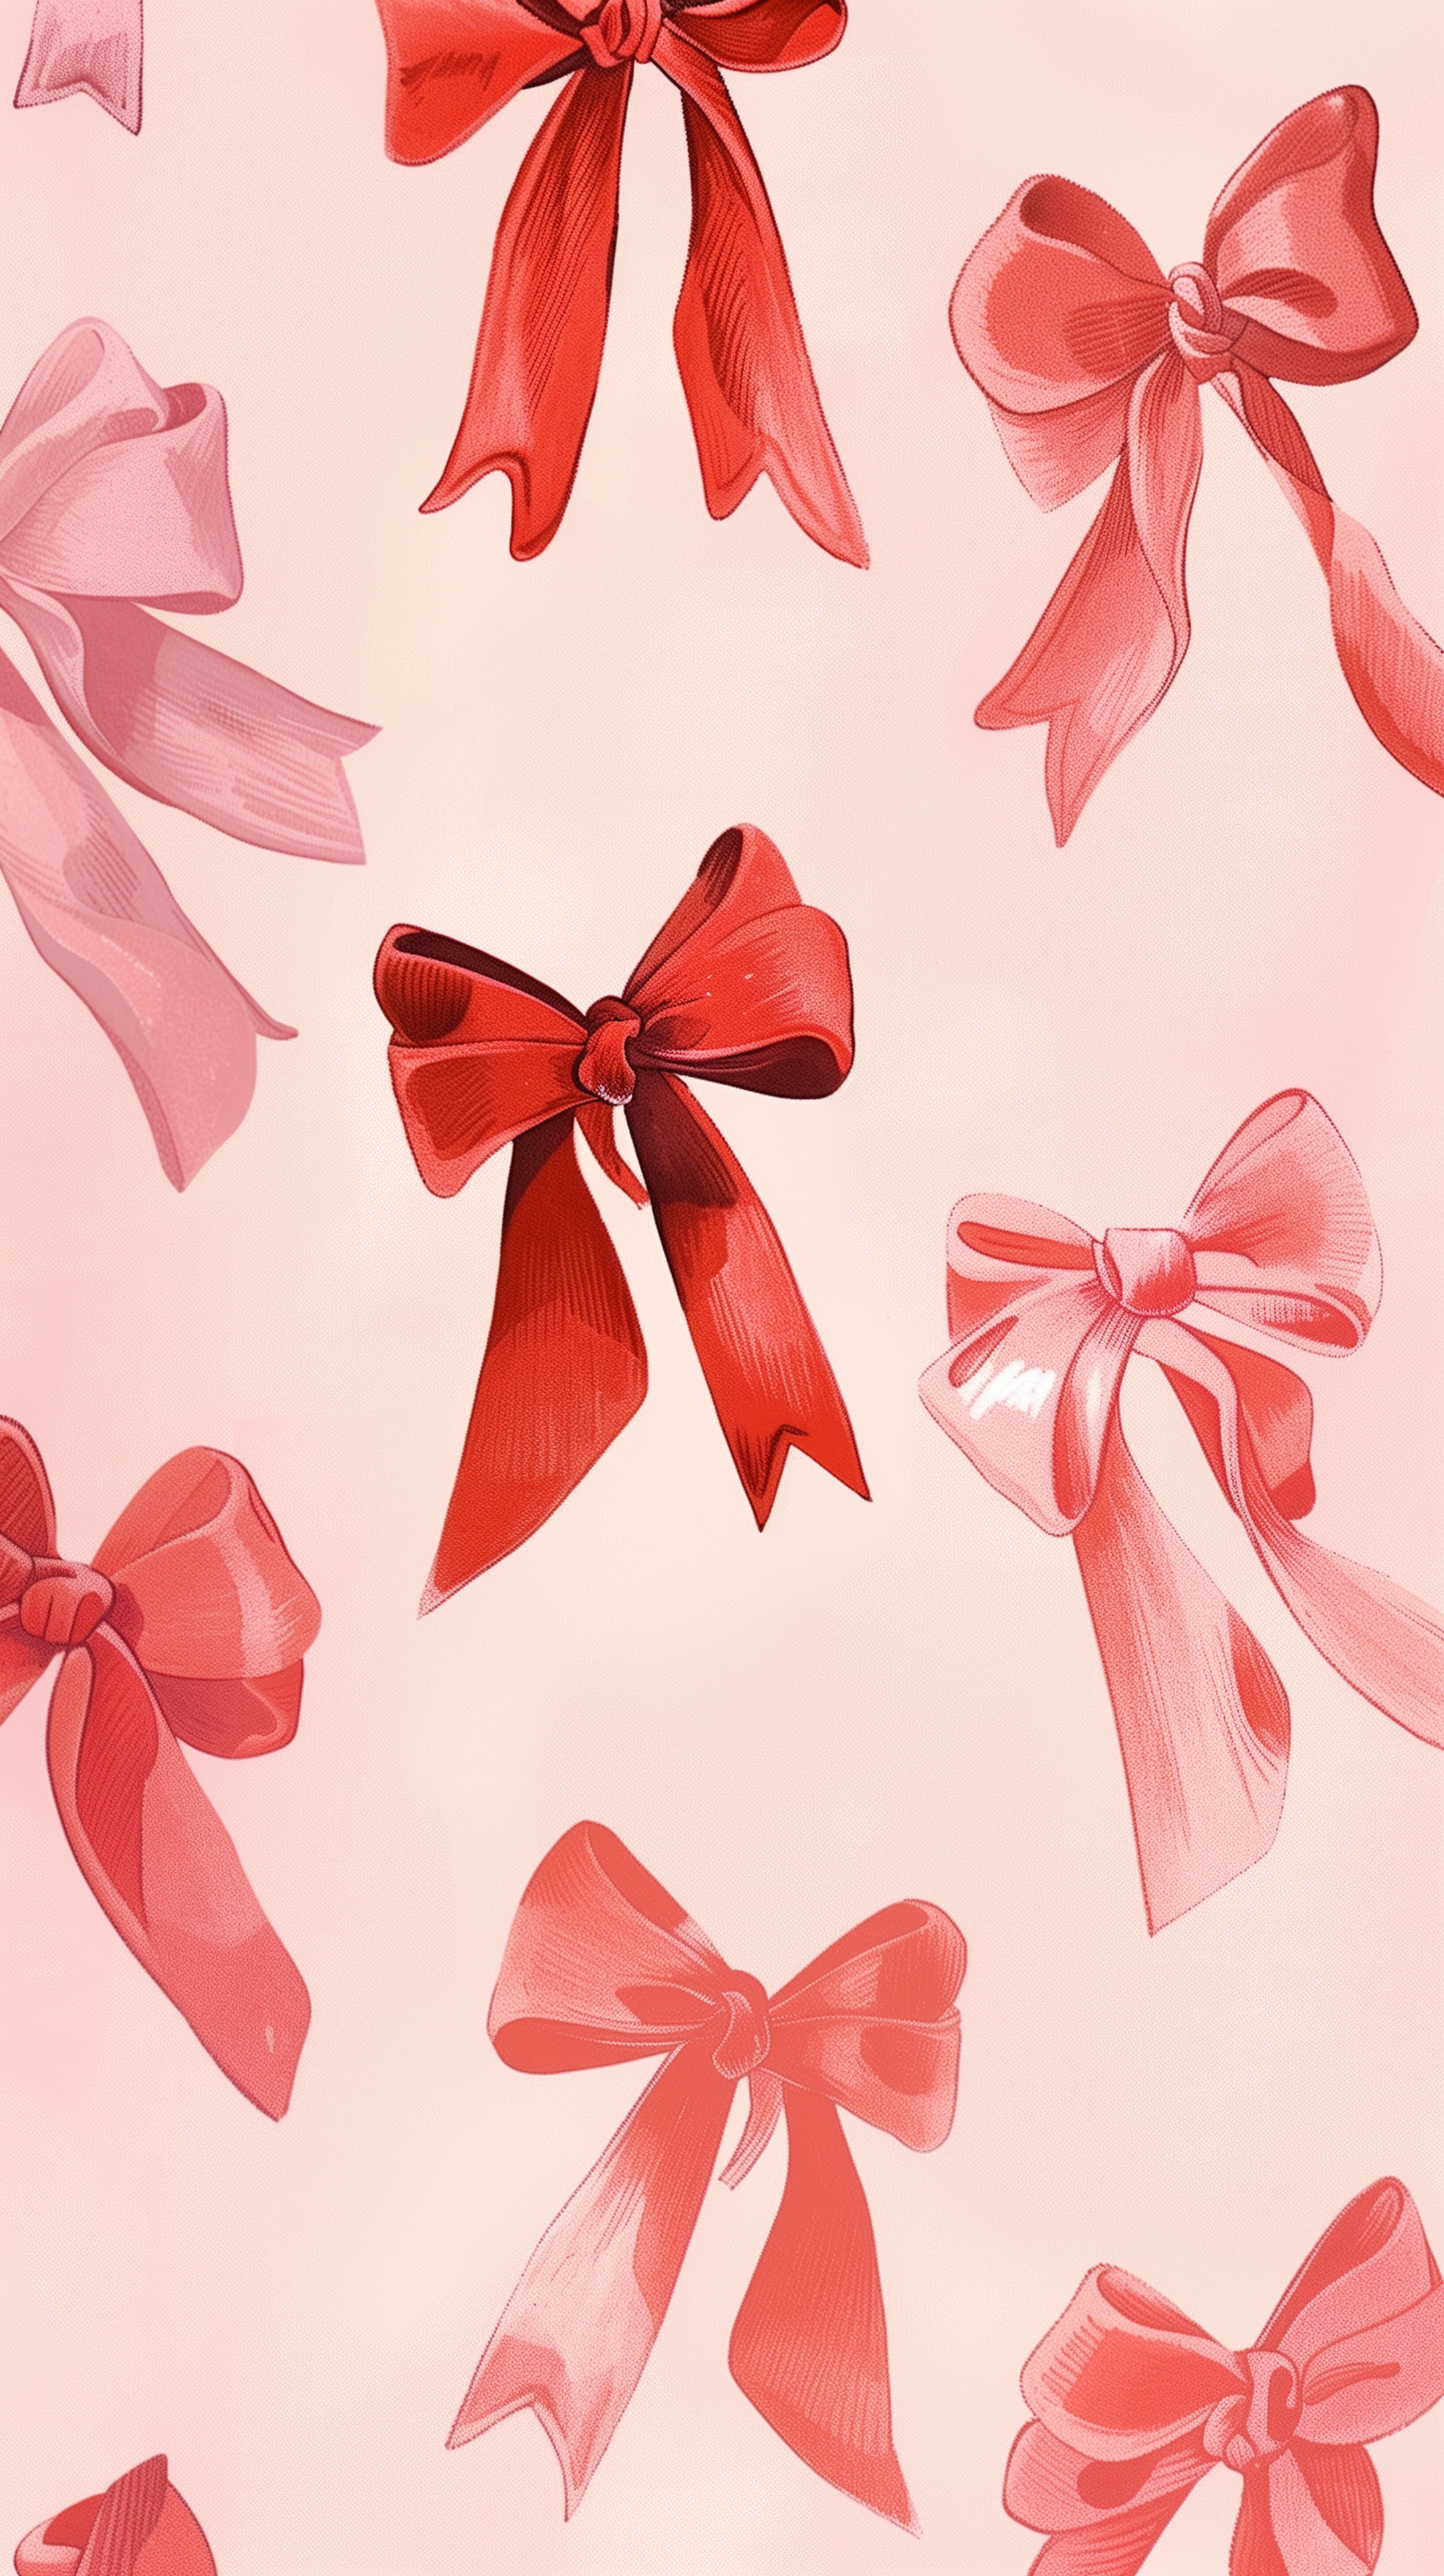 Pretty Pink Ribbons for Your Screen Tapeta[f8723b9734e840c3ae5d]